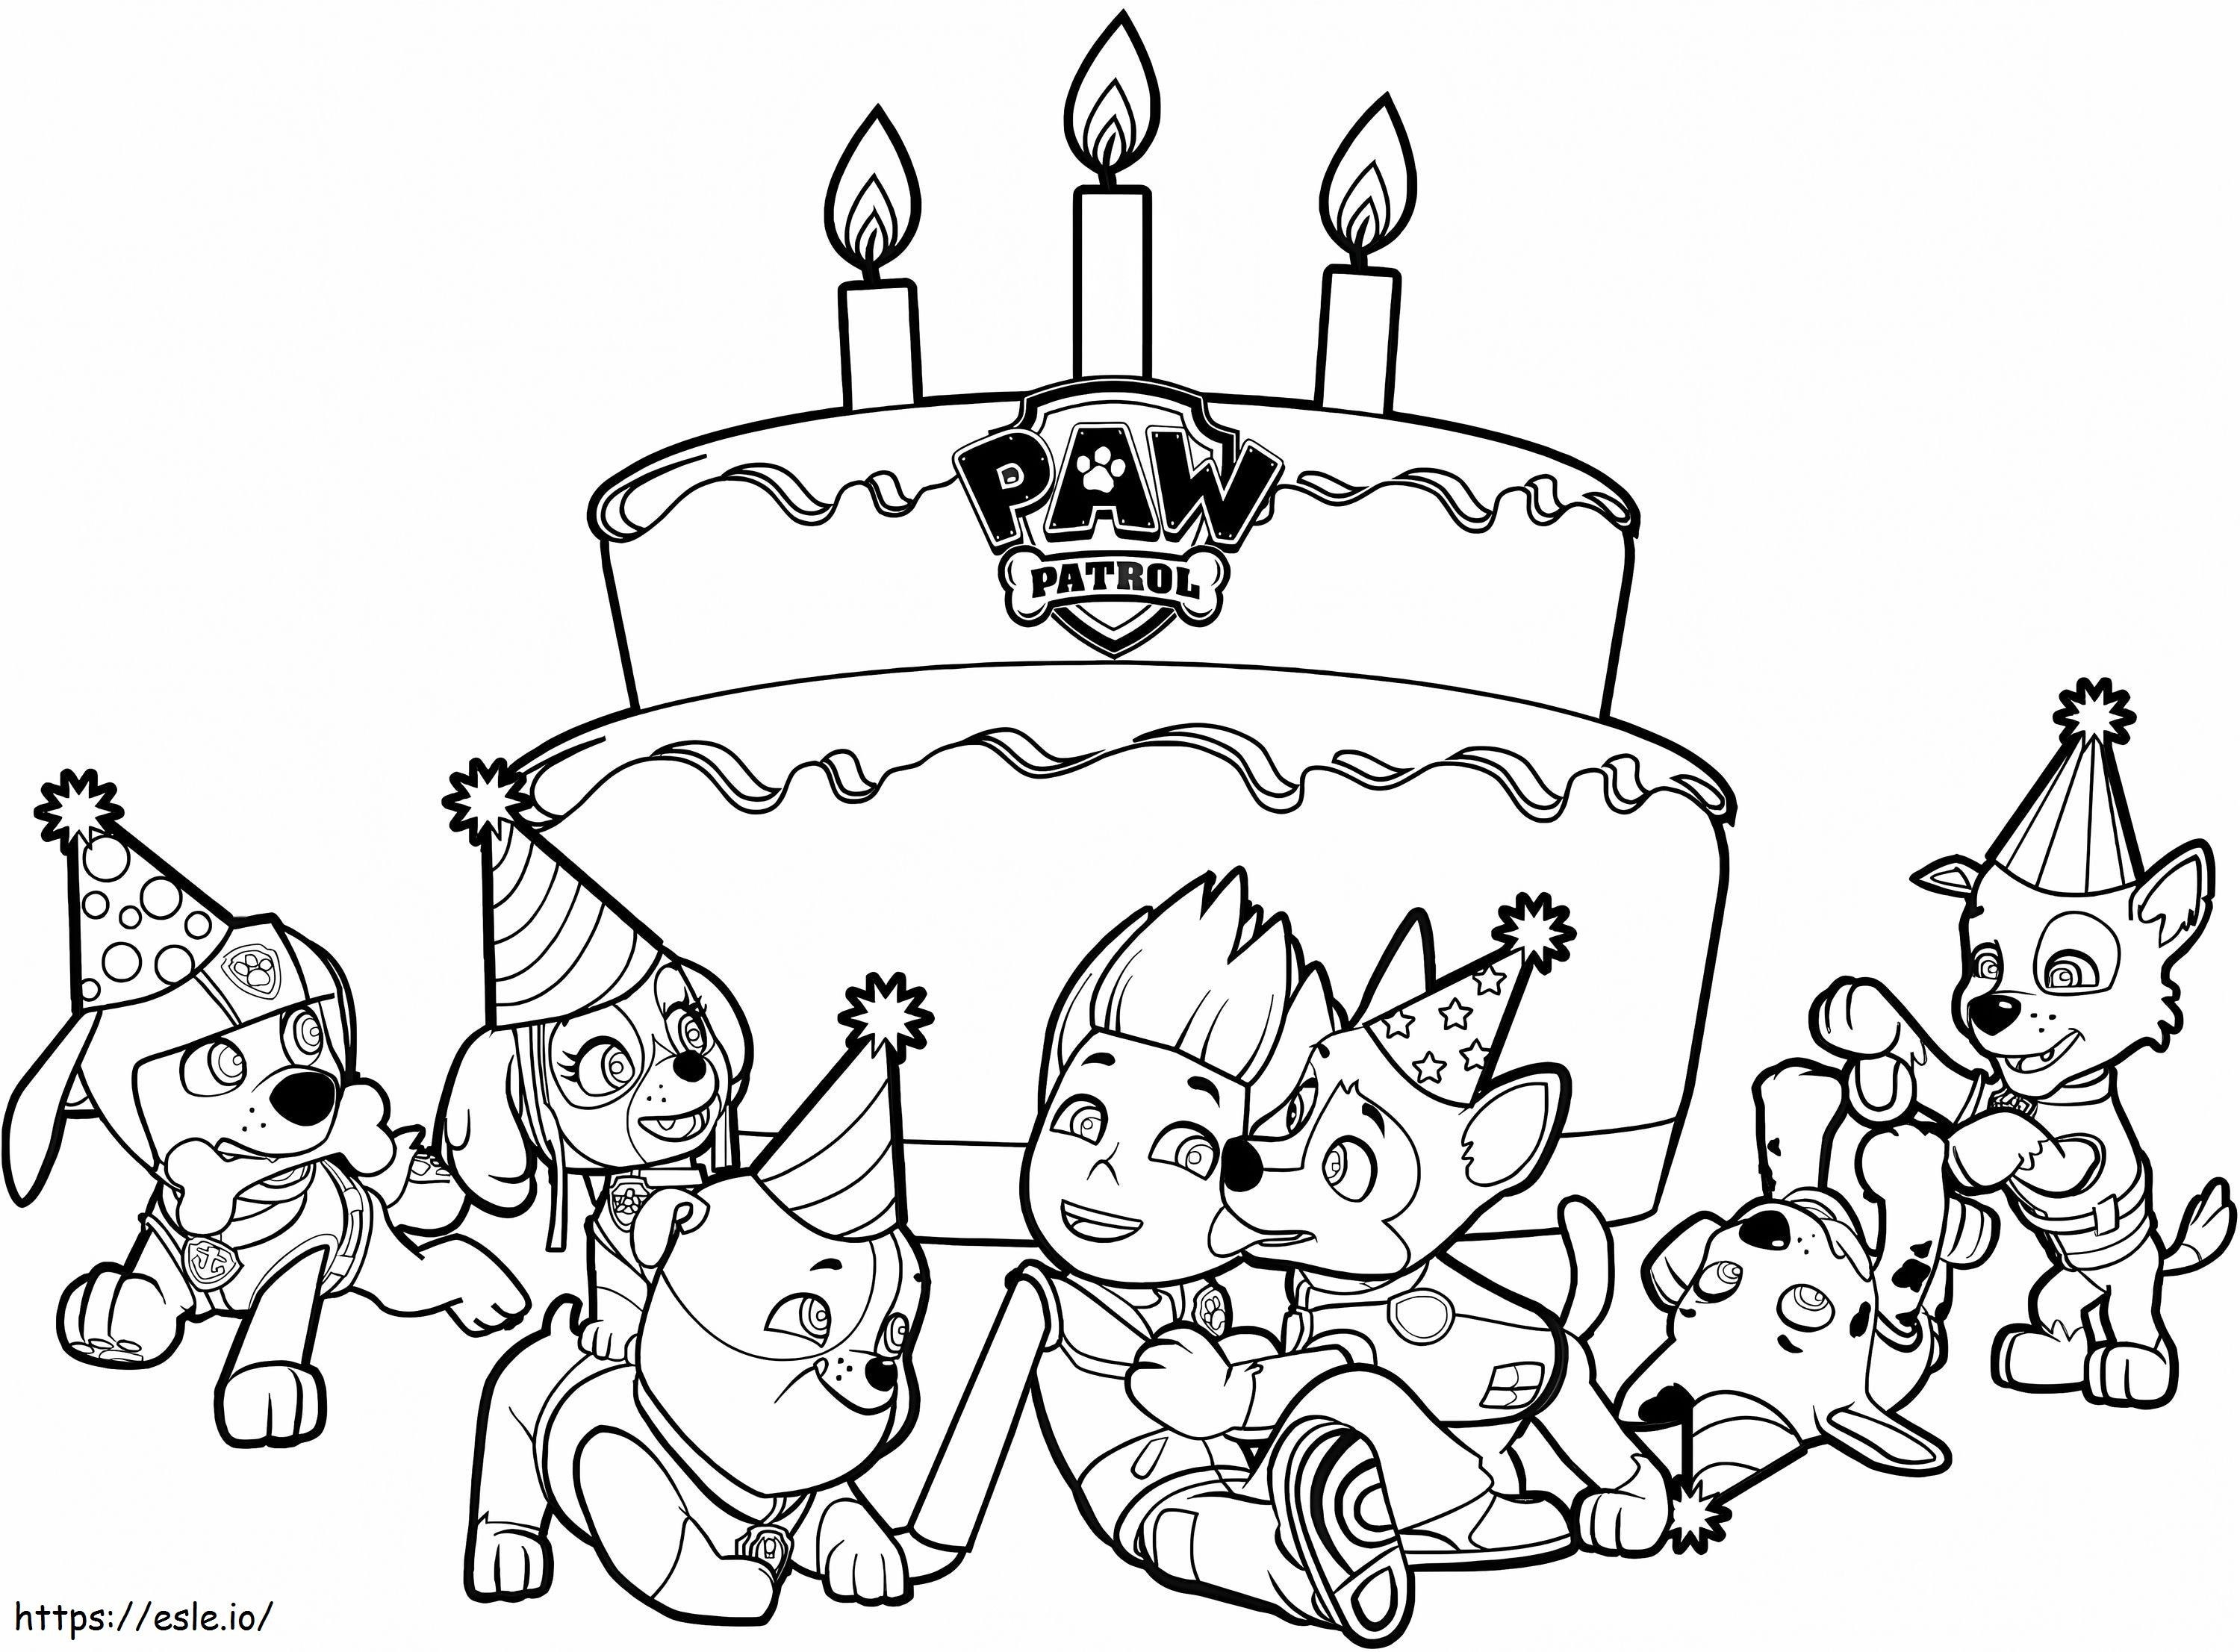 1565744685 Happy Birthday Ryder A4 E1622857381821 coloring page